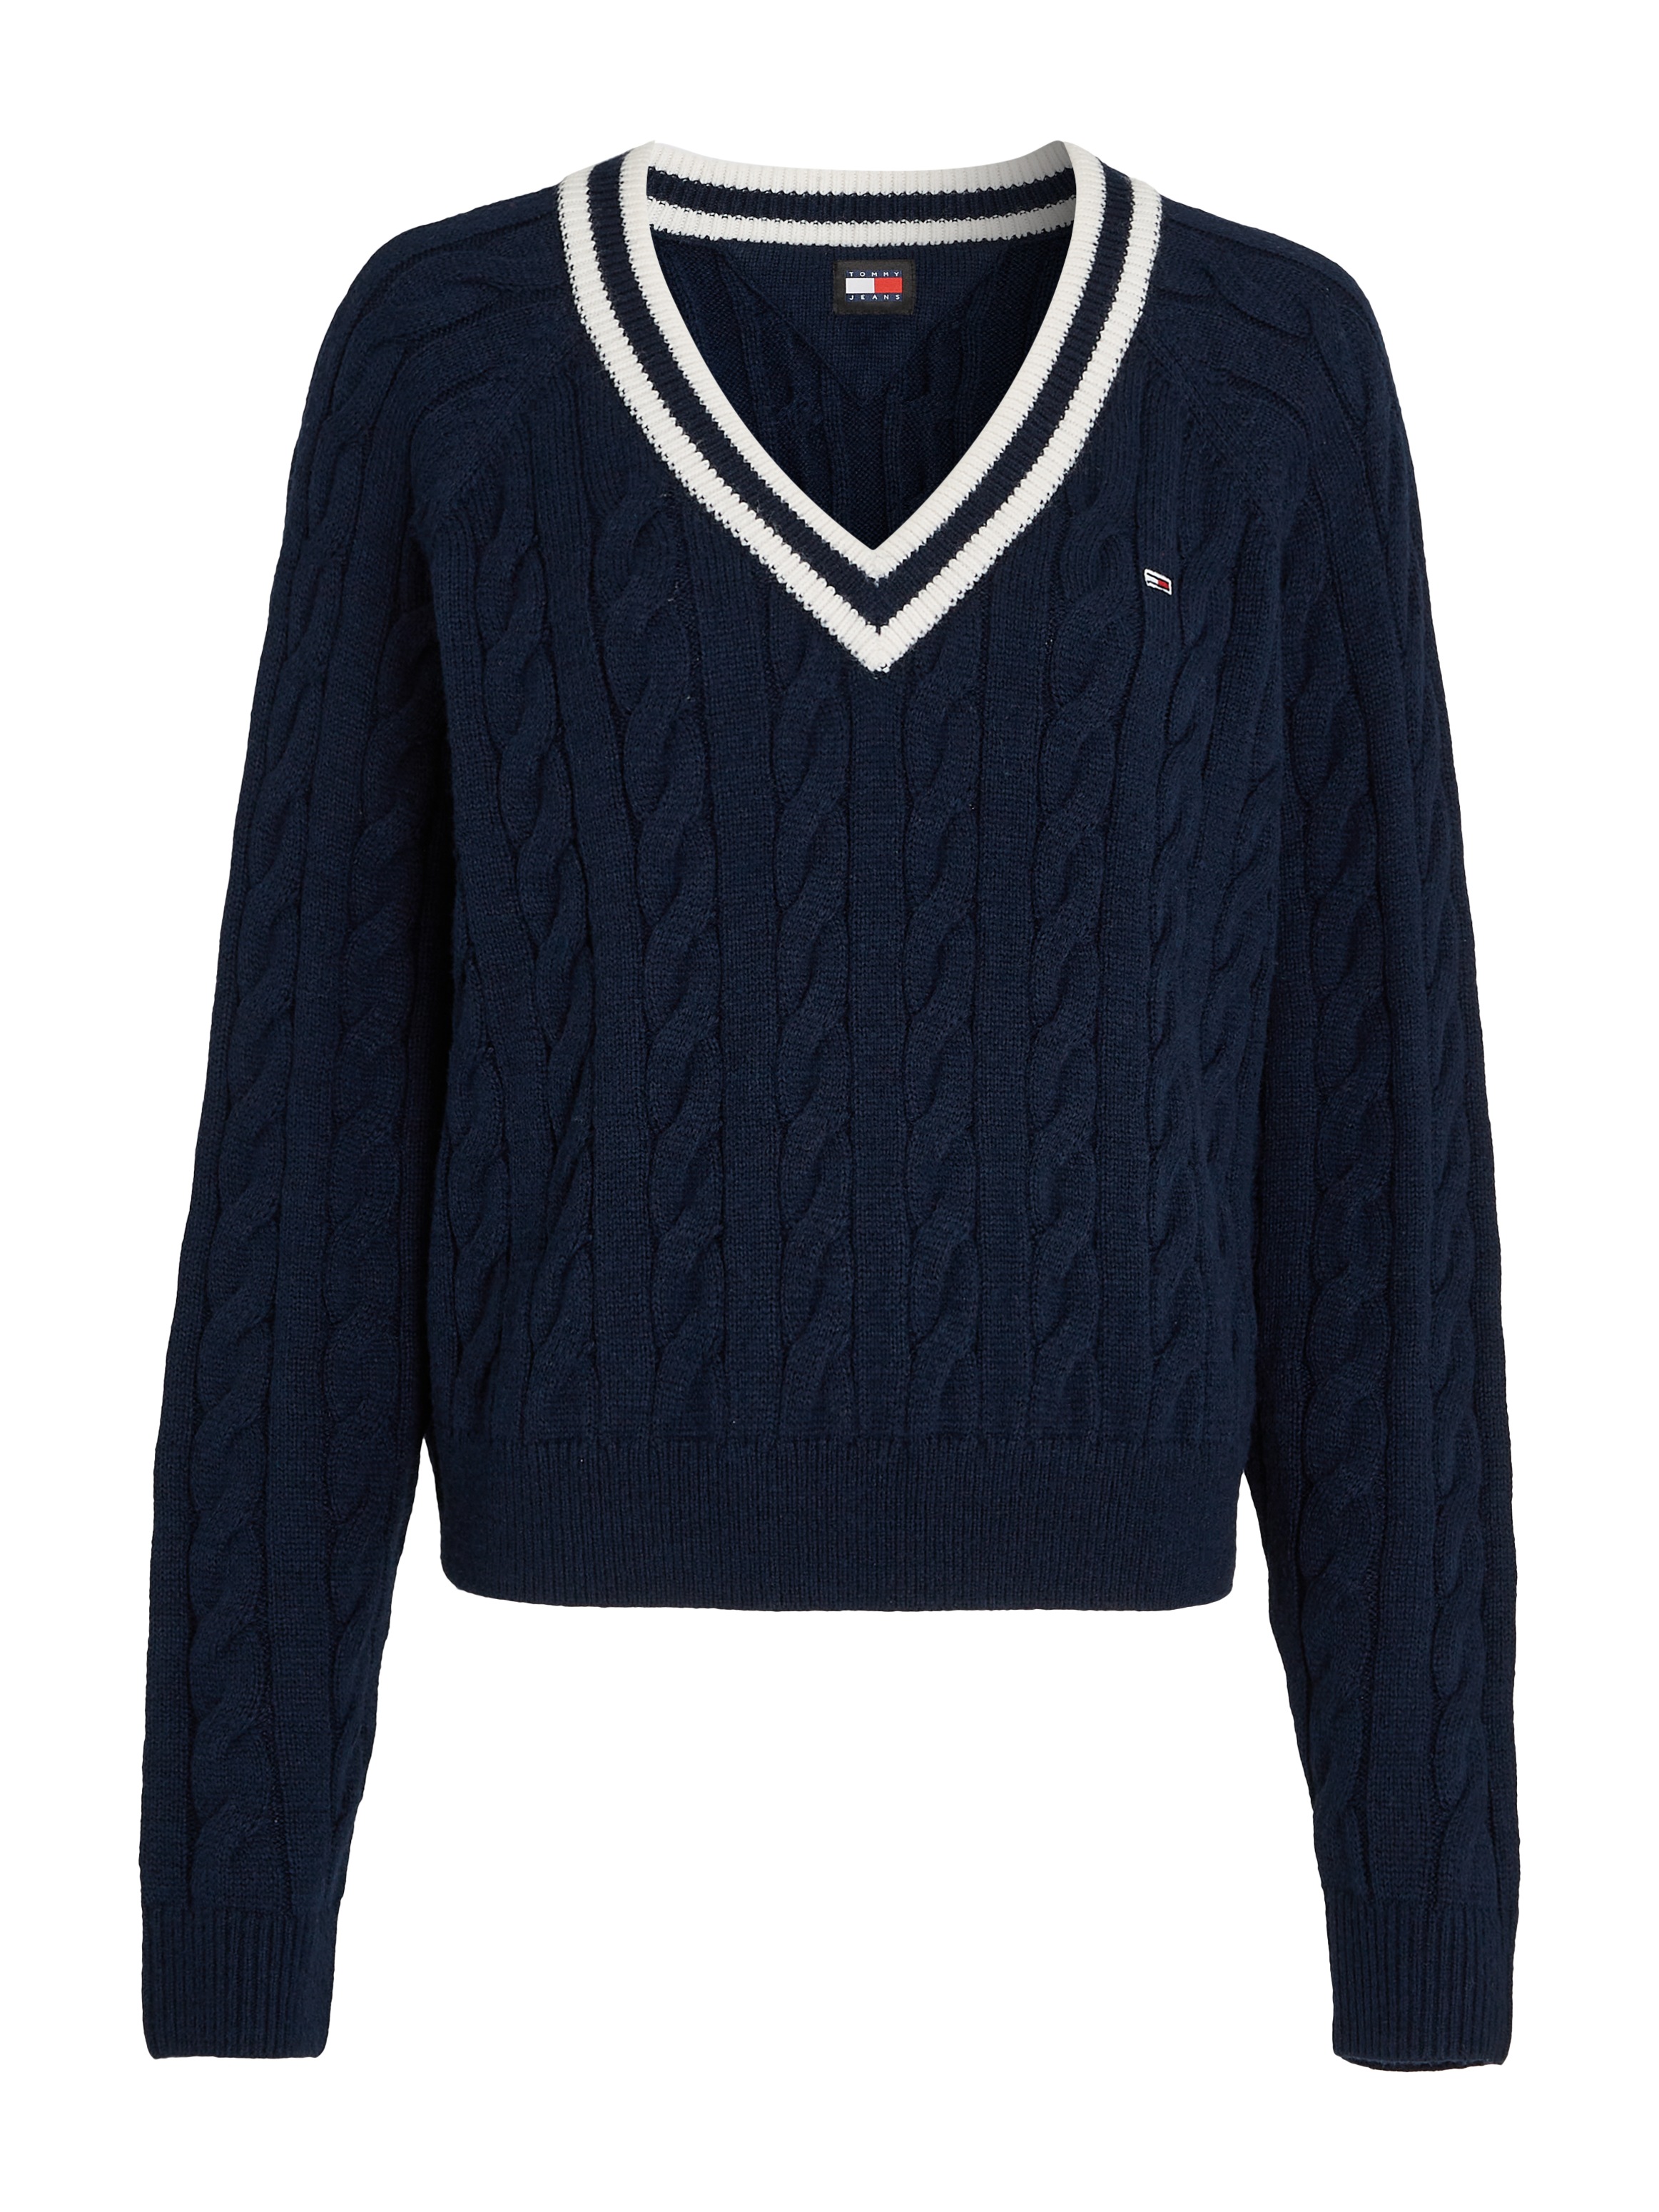 V-Ausschnitt-Pullover Tommy bei Logostickerei »TJW CABLE V-NECK ♕ mit Jeans SWEATER«,